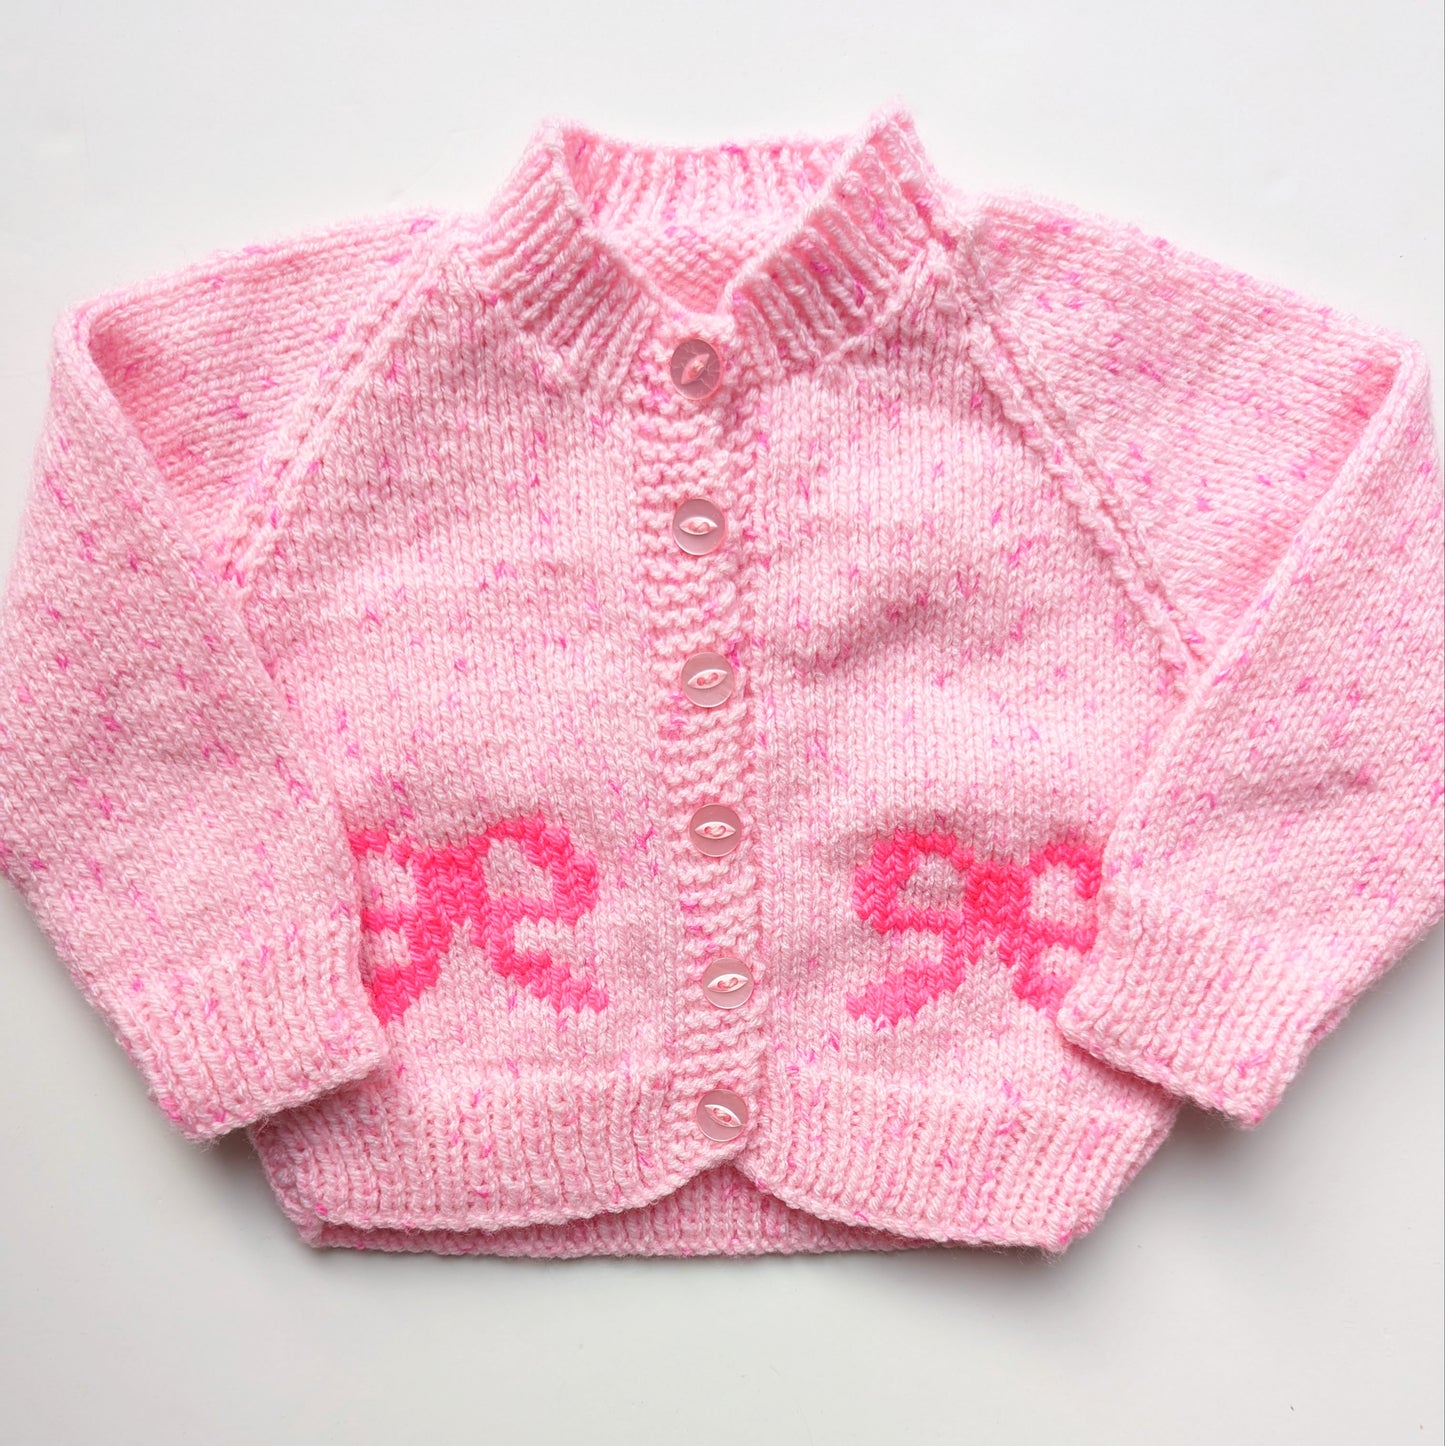 Pink Marl Bow Cardigan 6-12 months